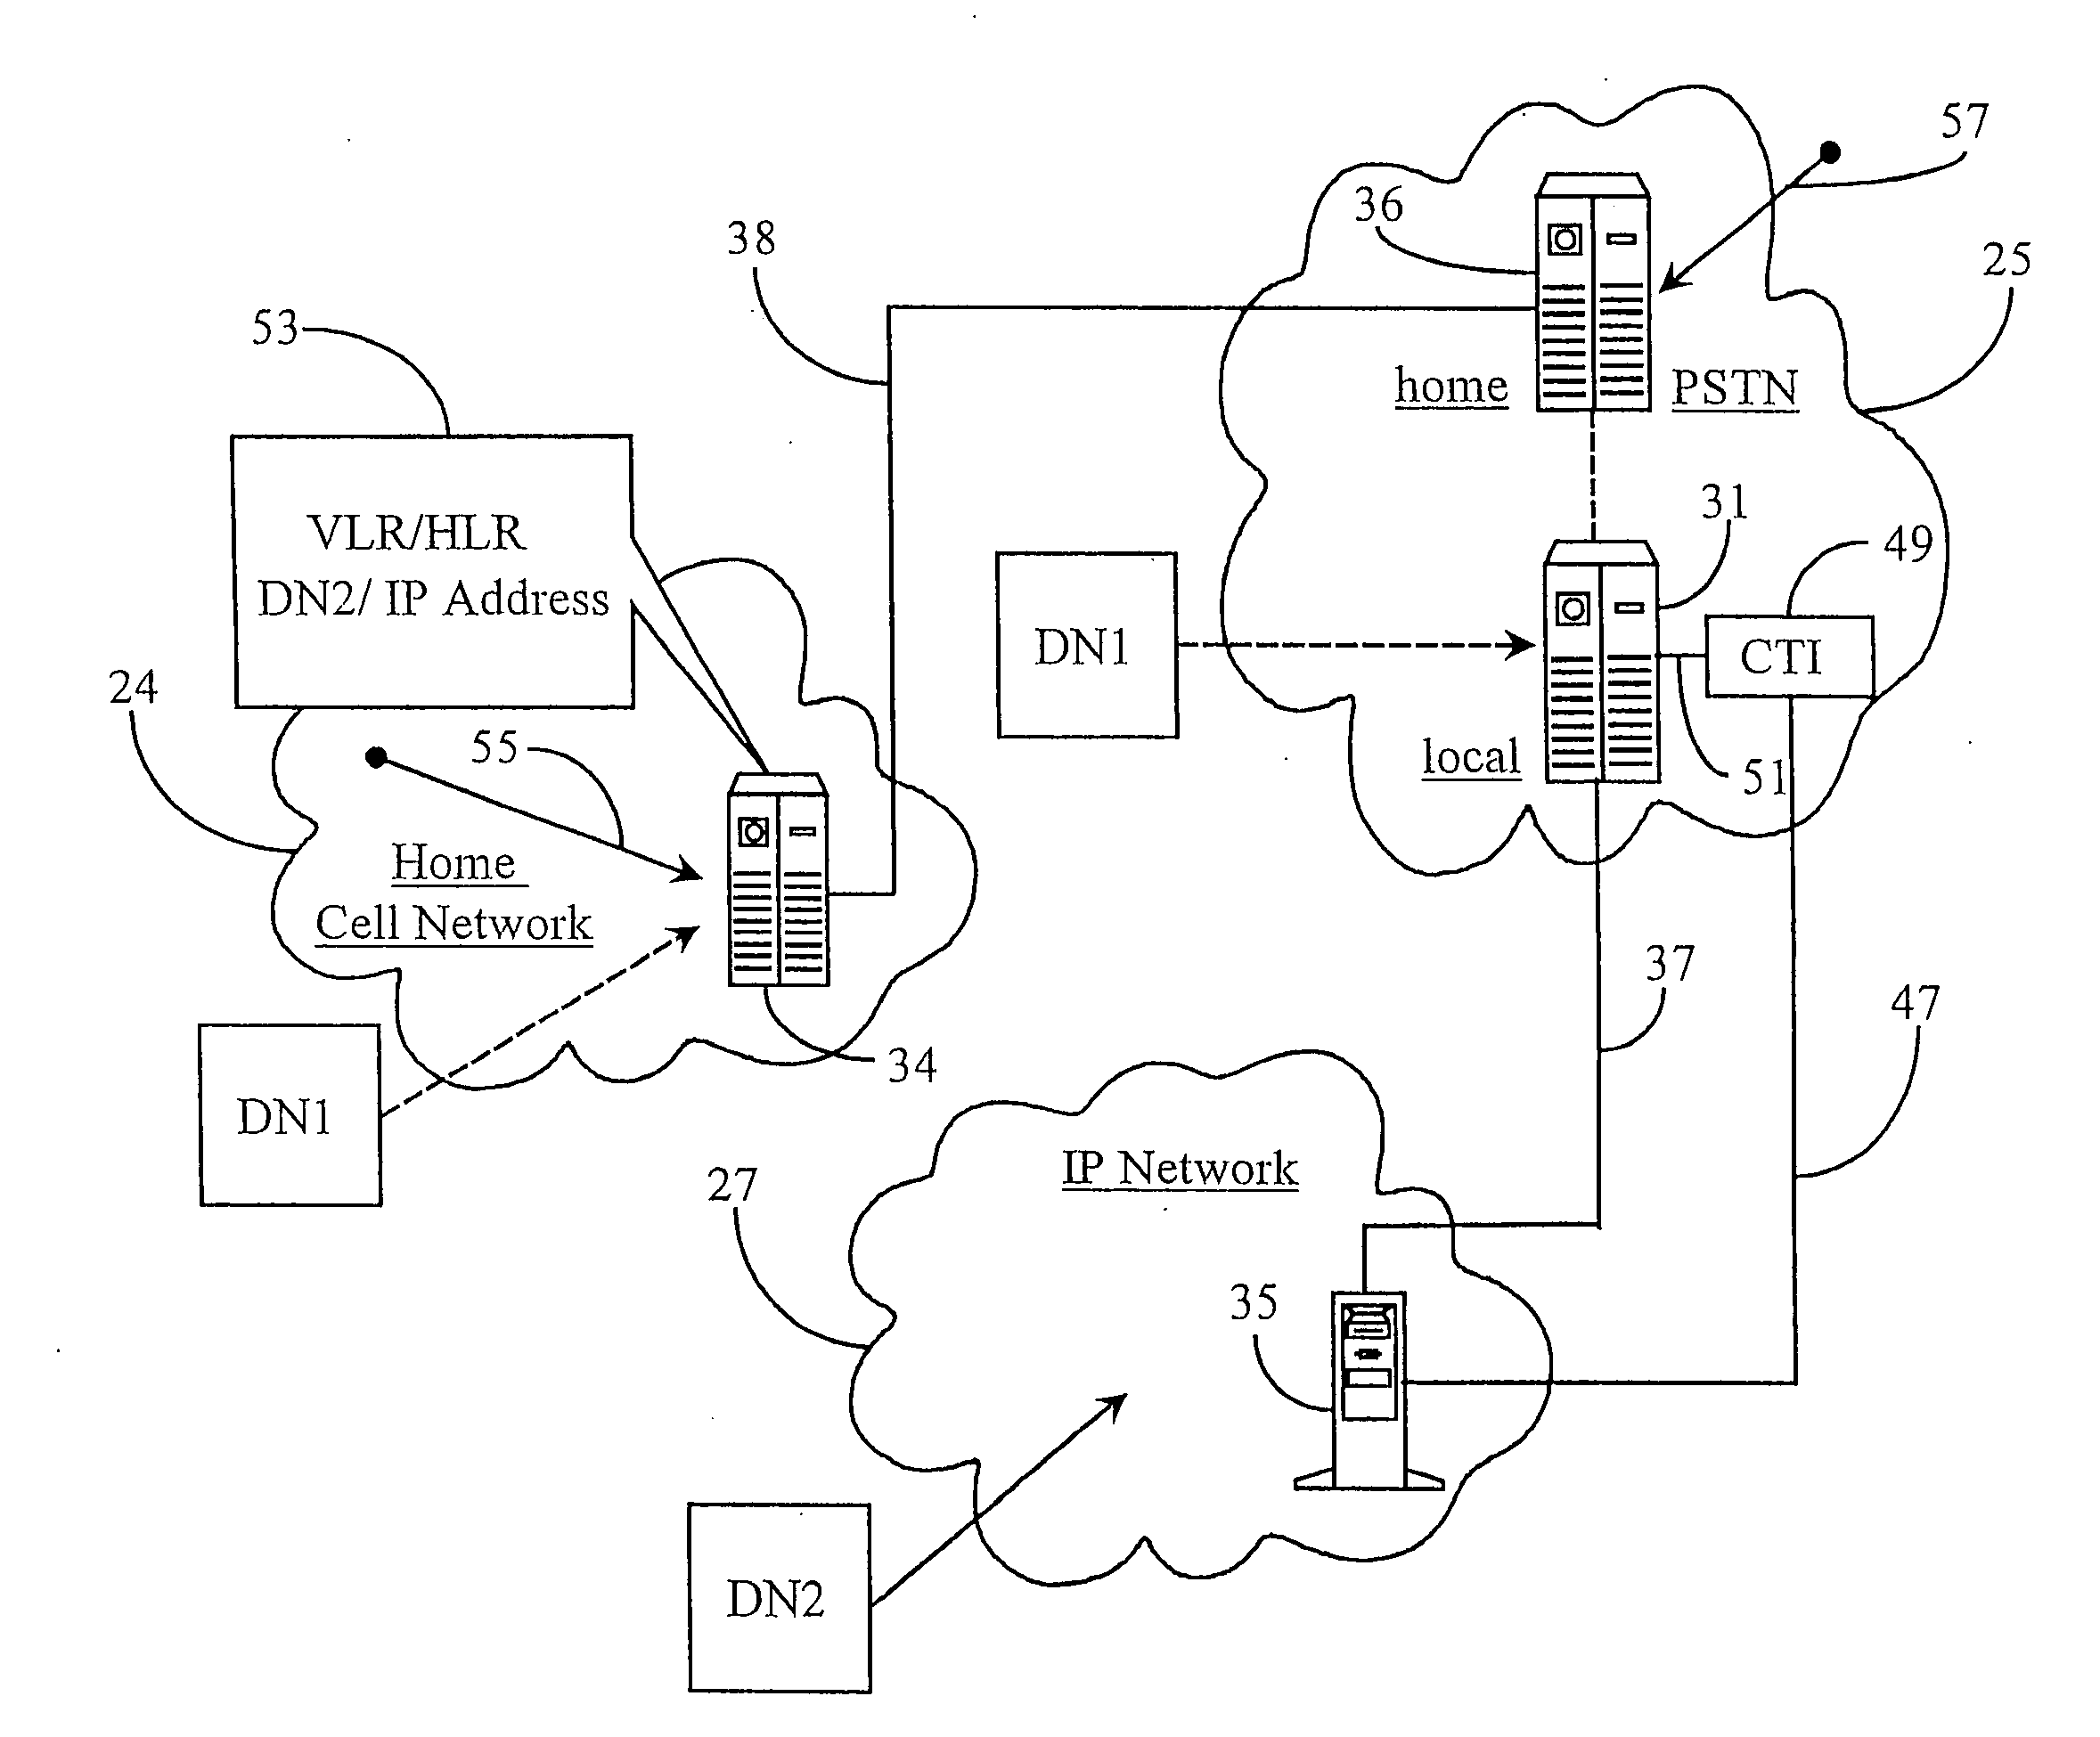 Telecommunication system for automatically locating by network connection and selectively delivering calls to mobile client devices